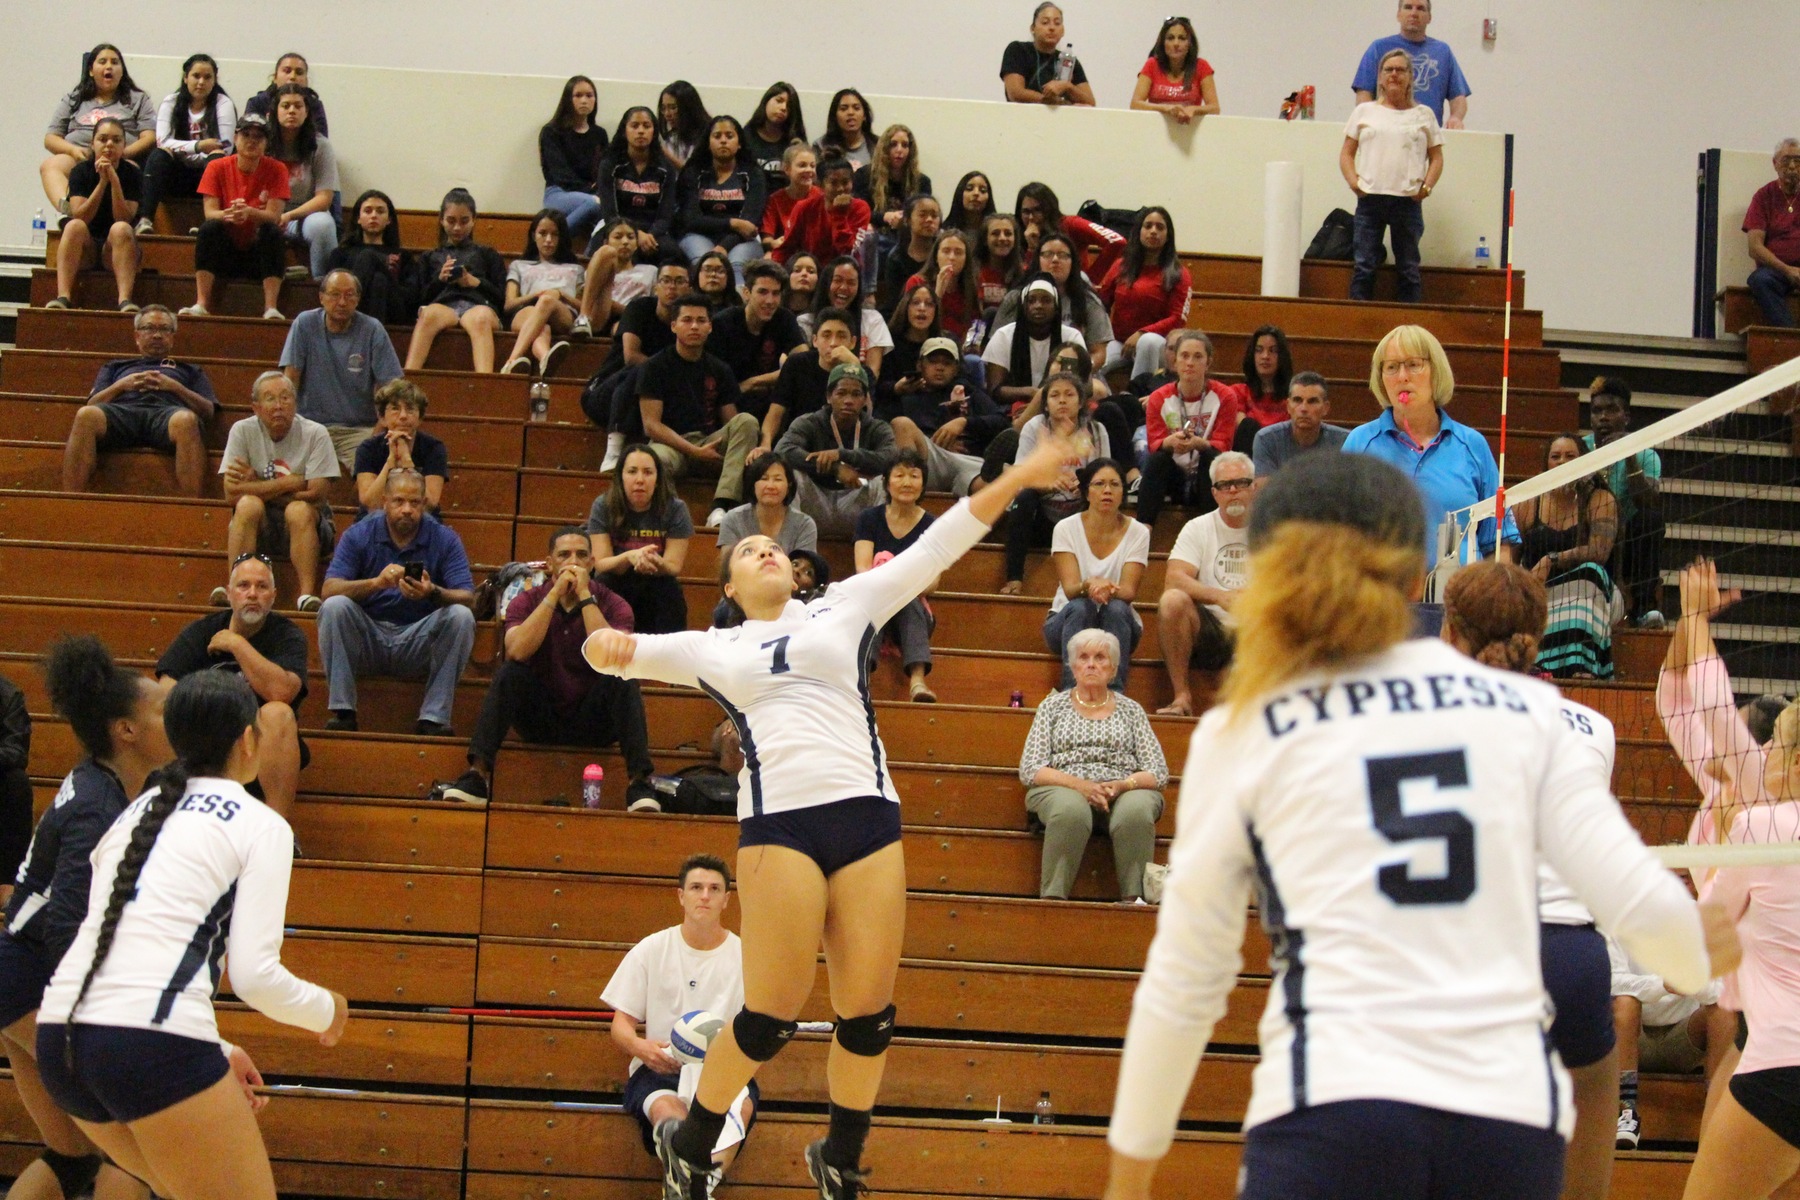 No. 18 Volleyball Sweeps No. 25 Golden West, 3-0